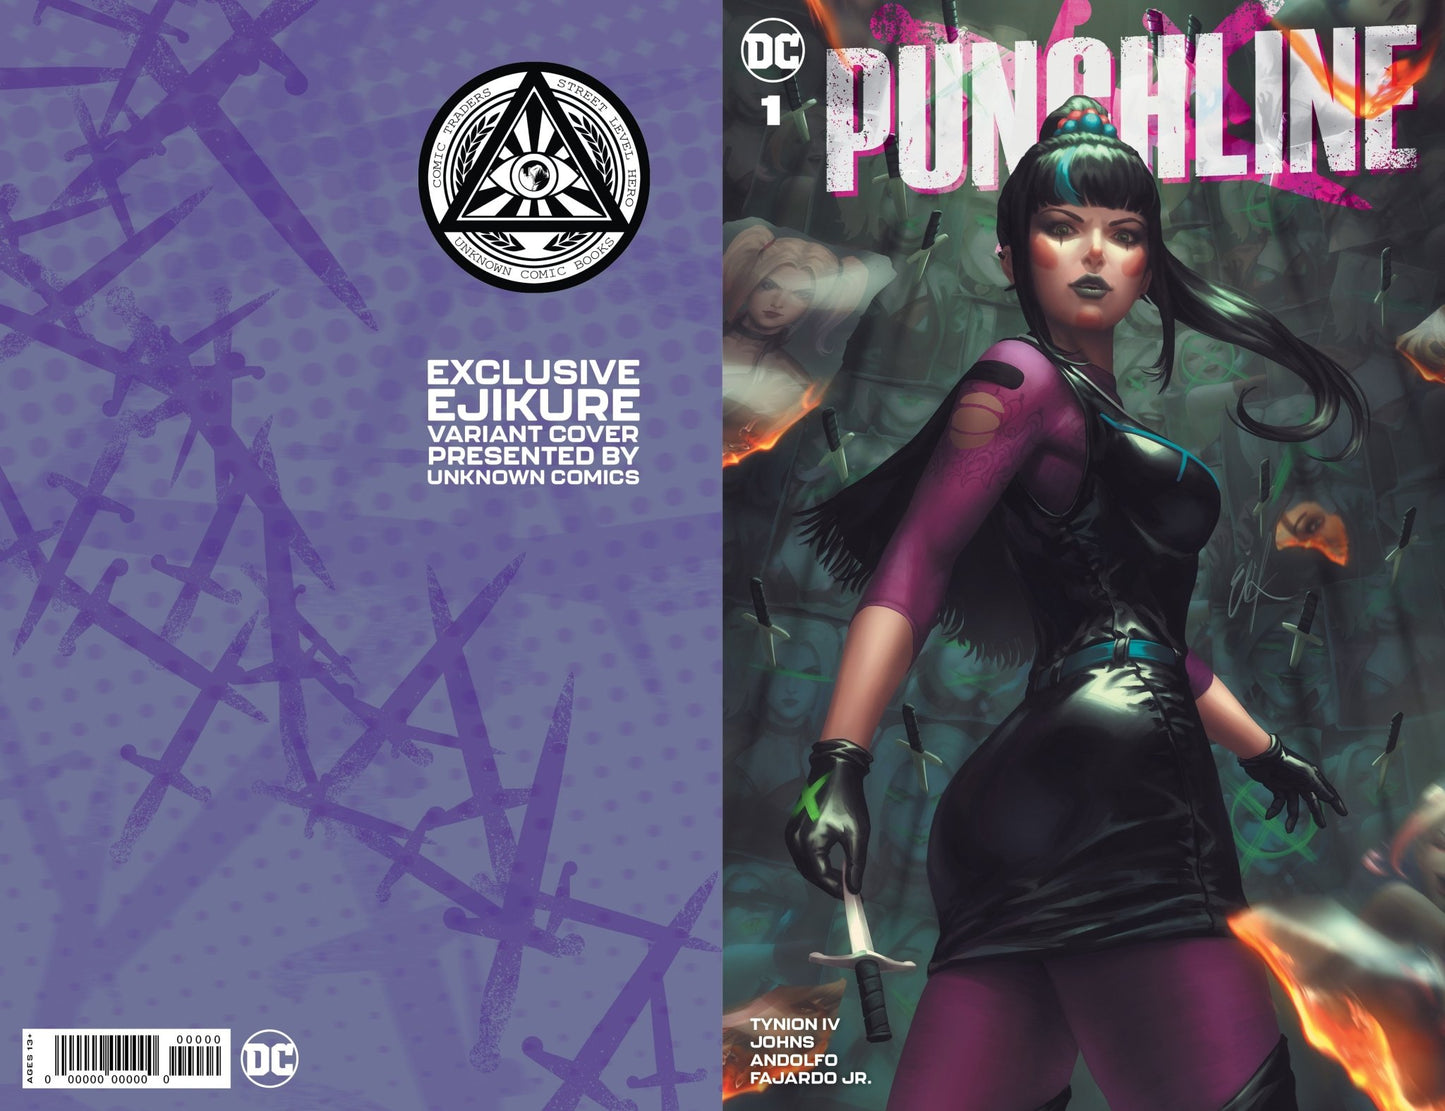 PUNCHLINE SPECIAL #1 (ONE SHOT) UNKNOWN COMICS EJIKURE EXCLUSIVE VAR (11/10/2020) - FURYCOMIX